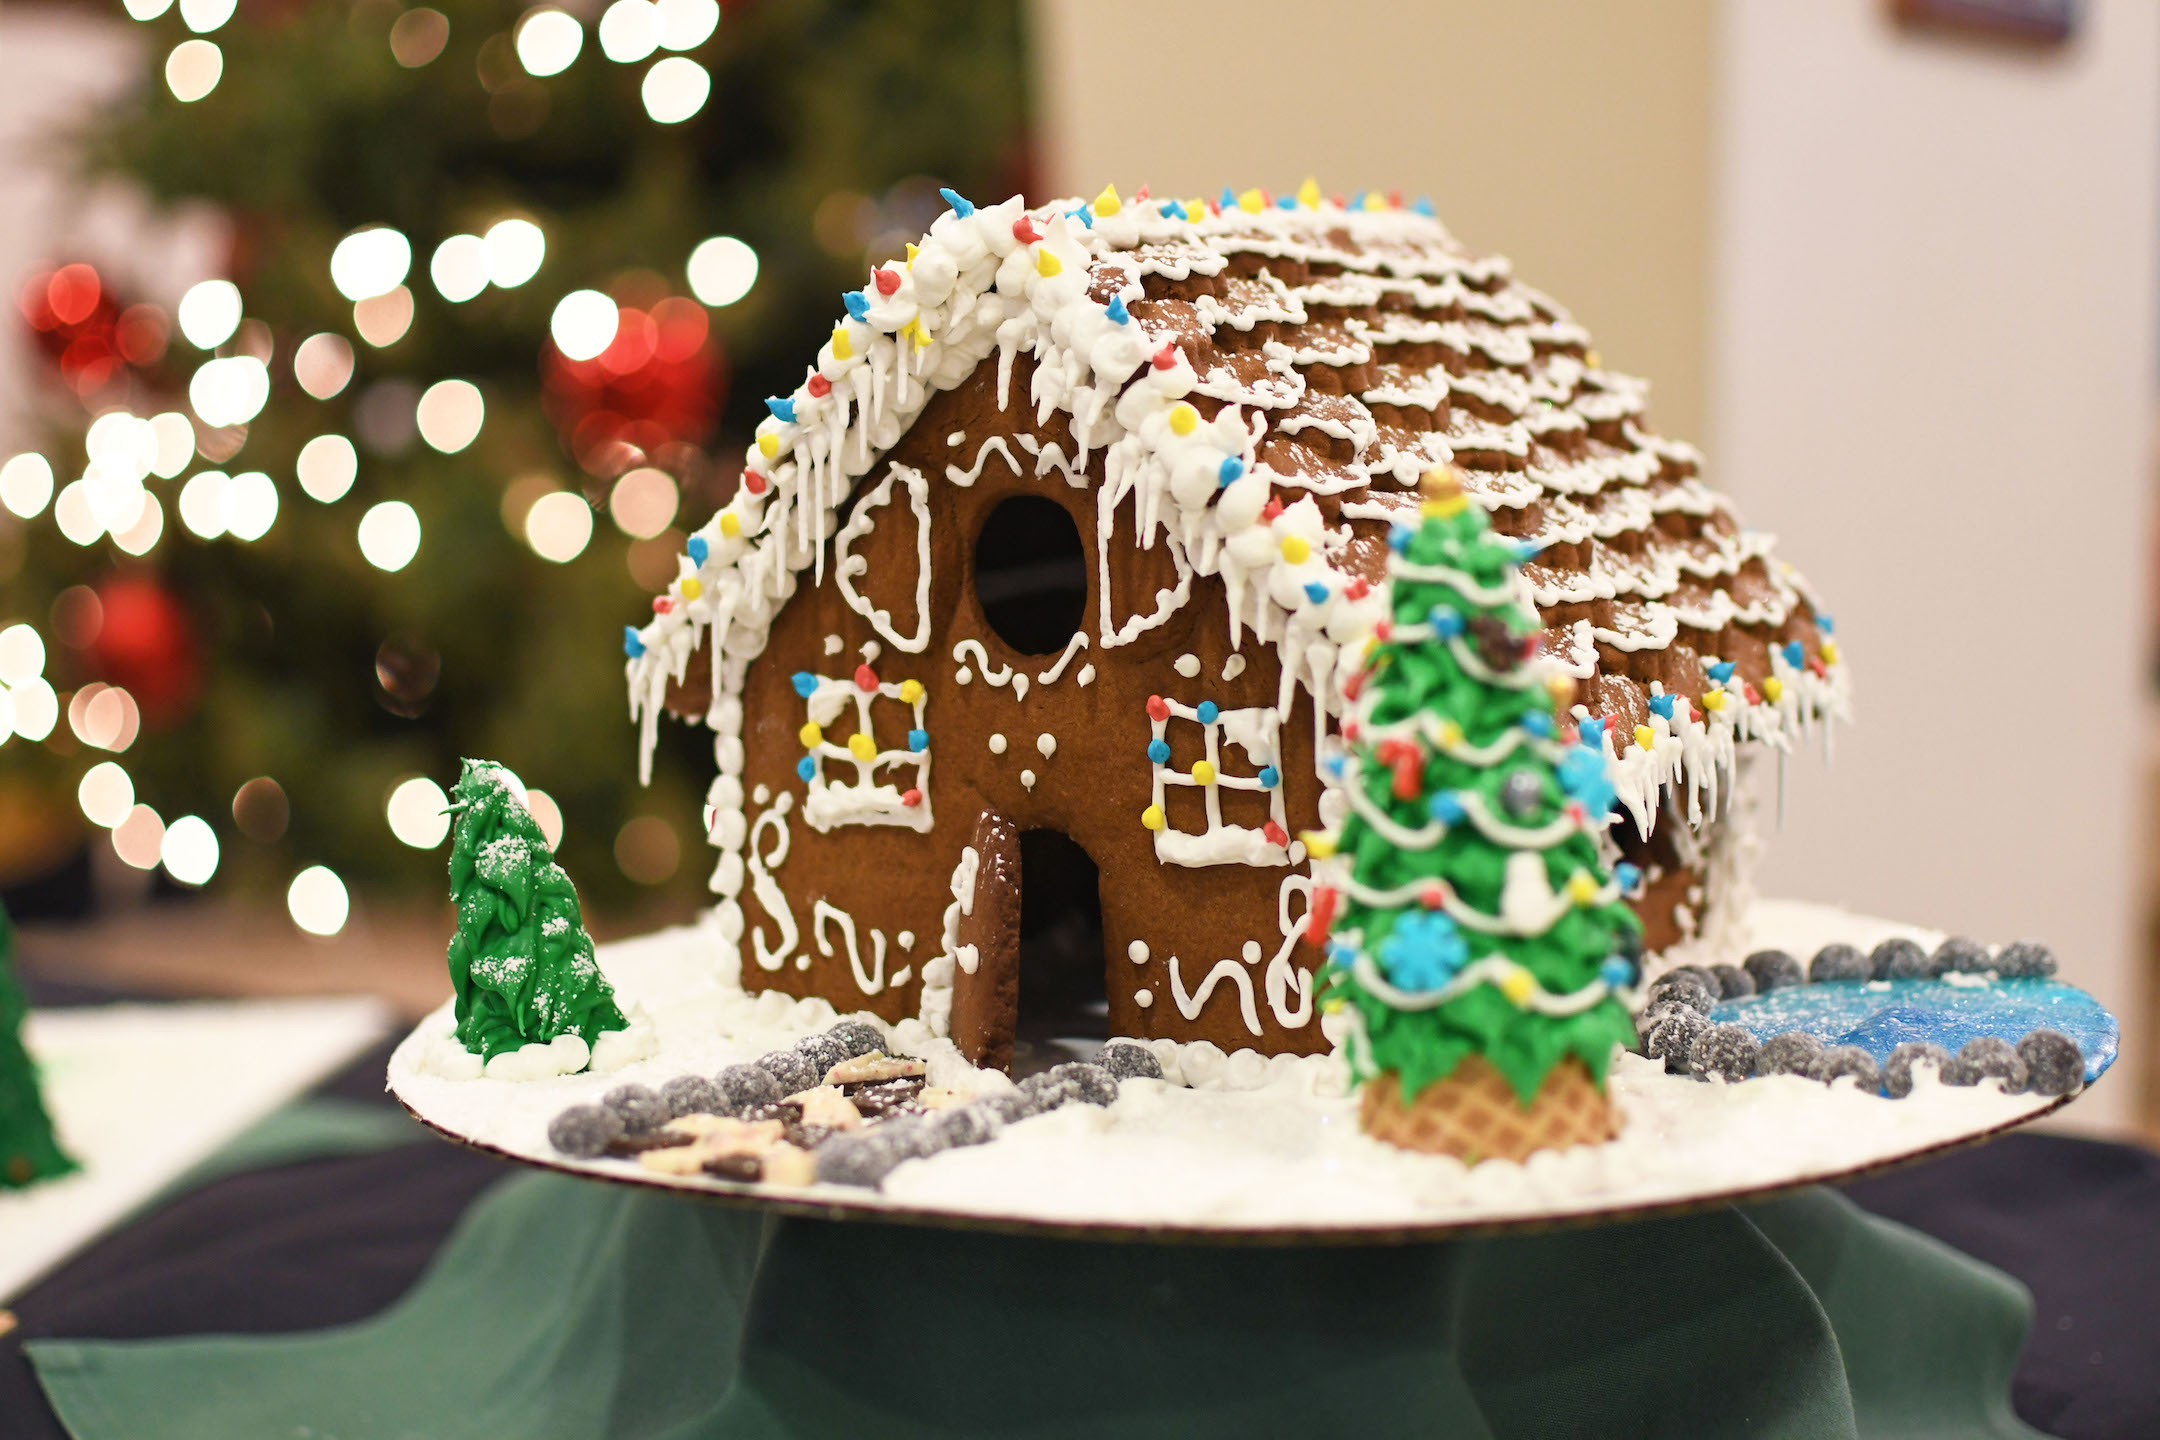 Pictured: The winner from the 2021 gingerbread competition at NFCI. (NCCC photo)